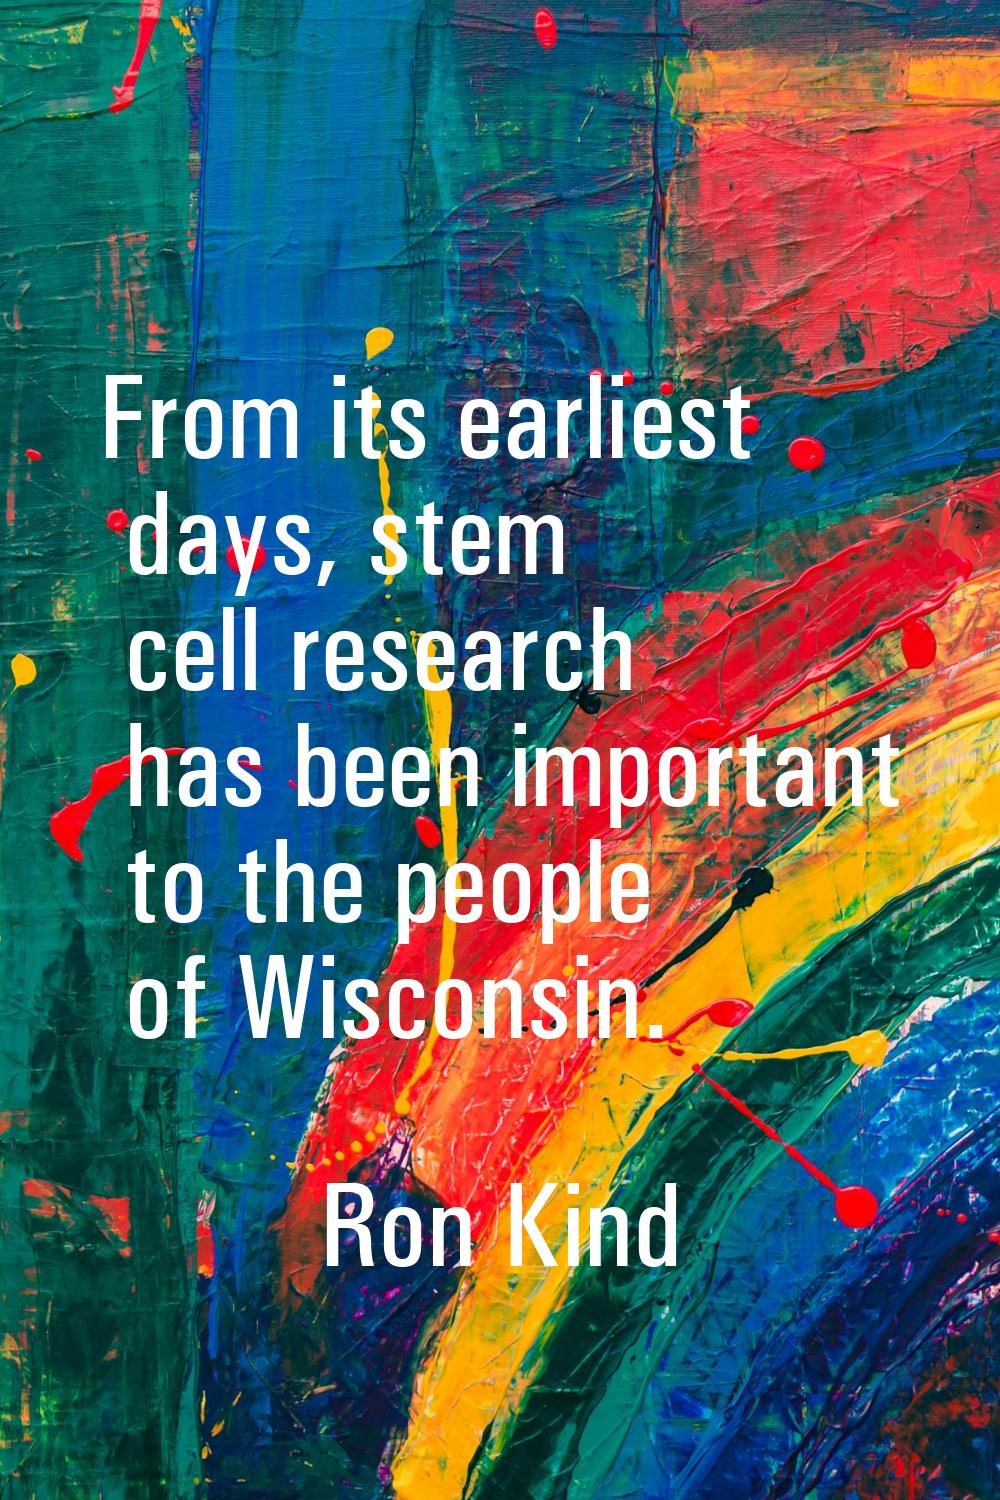 From its earliest days, stem cell research has been important to the people of Wisconsin.